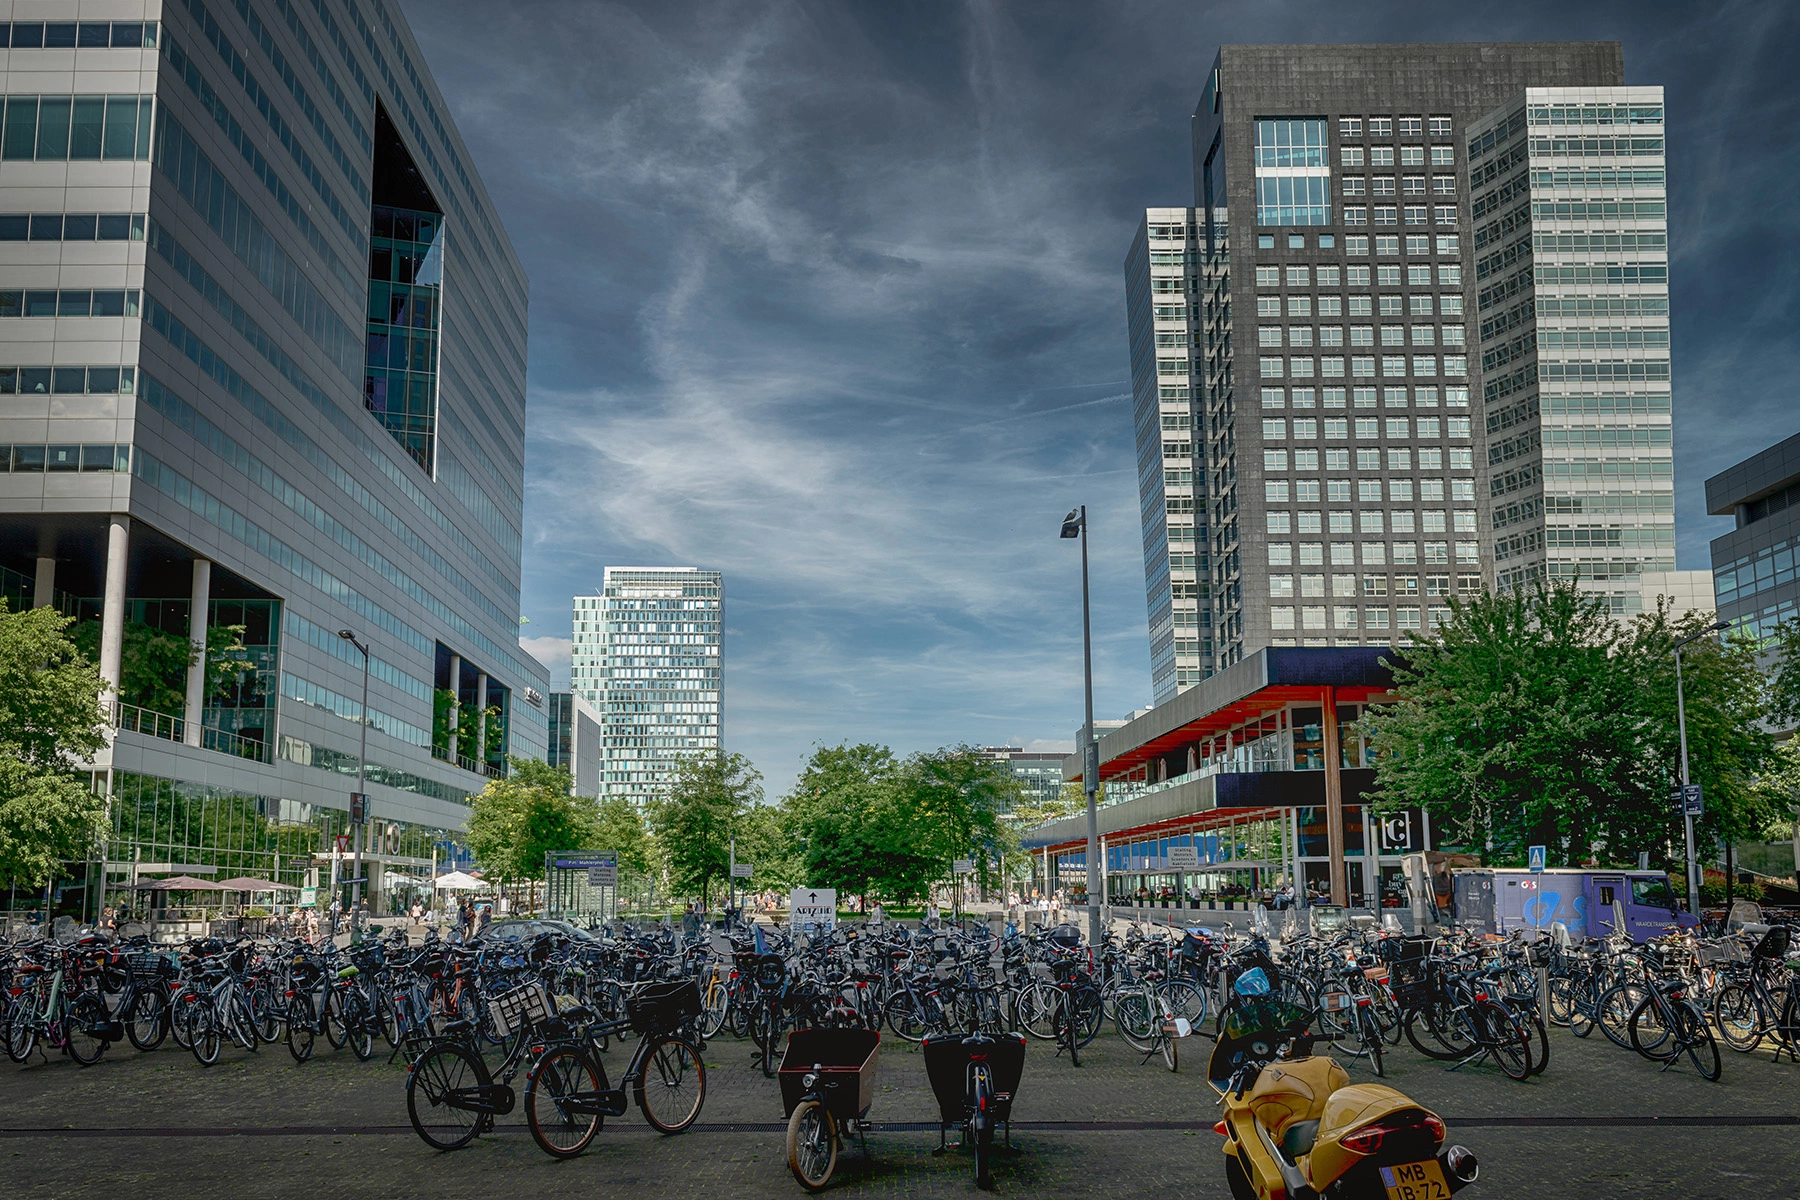 Bicycle parking in the Zuidas business district of Amsterdam